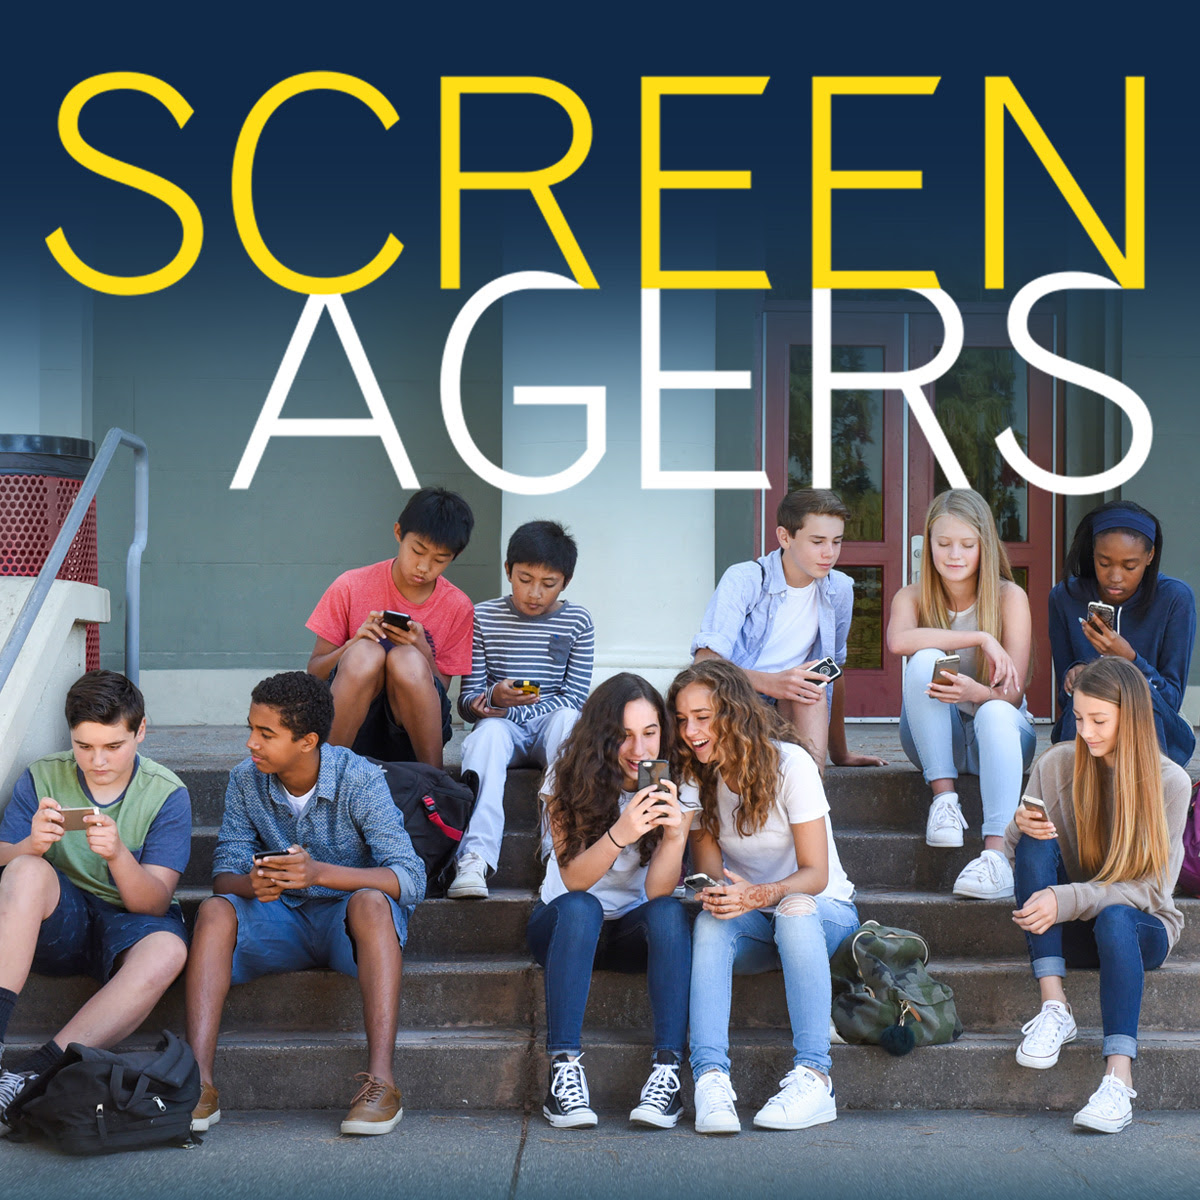 Screenagers Film Presented By Riverview School District Local PTSA's and Riverview PTSA Council